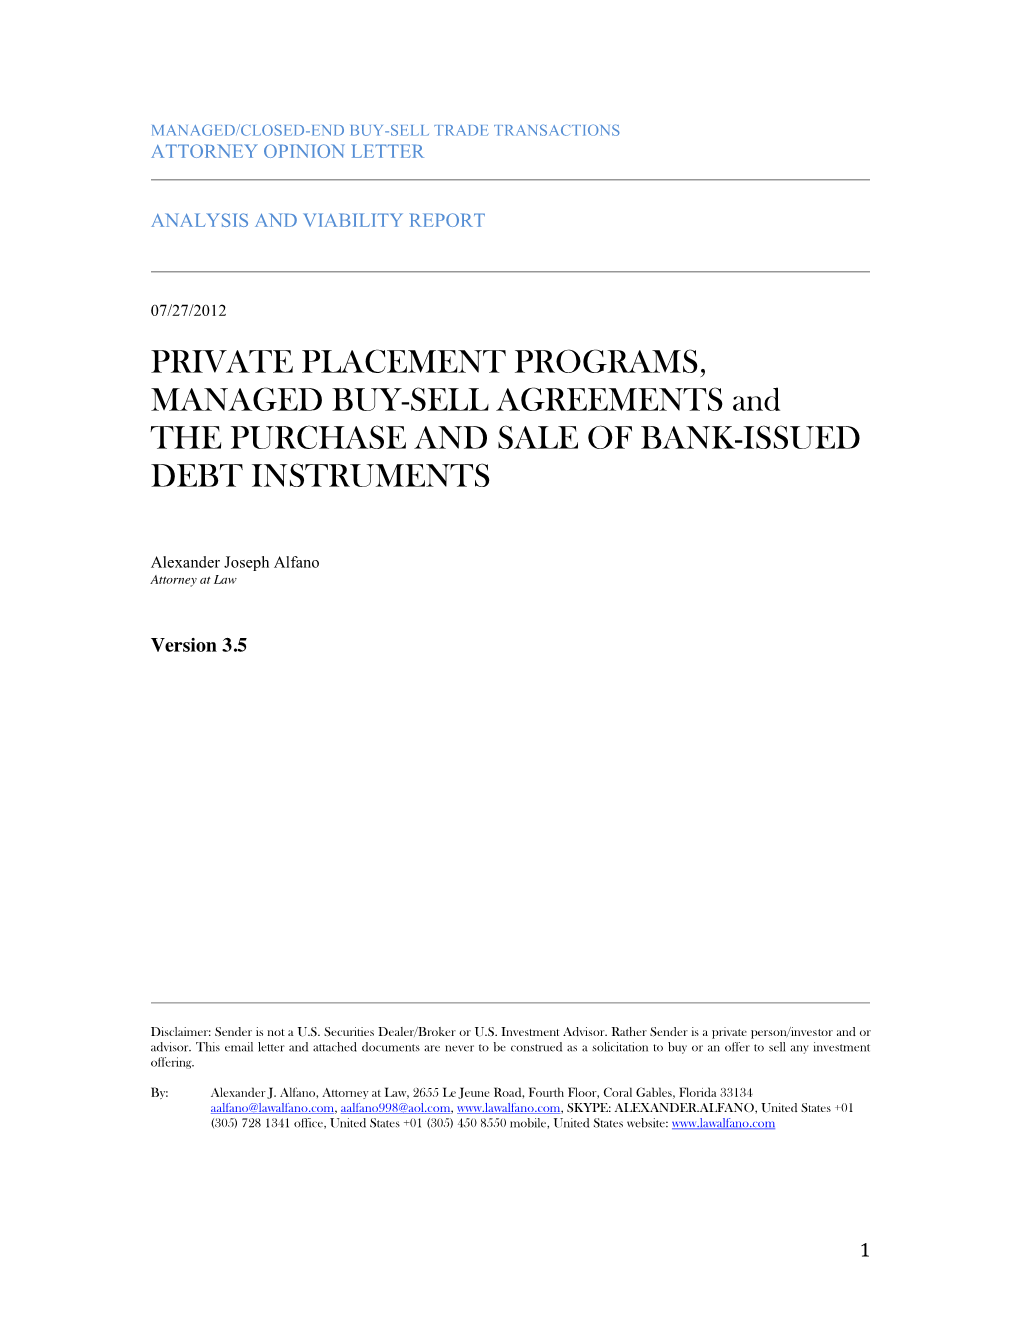 PRIVATE PLACEMENT PROGRAMS, MANAGED BUY-SELL AGREEMENTS and the PURCHASE and SALE of BANK-ISSUED DEBT INSTRUMENTS